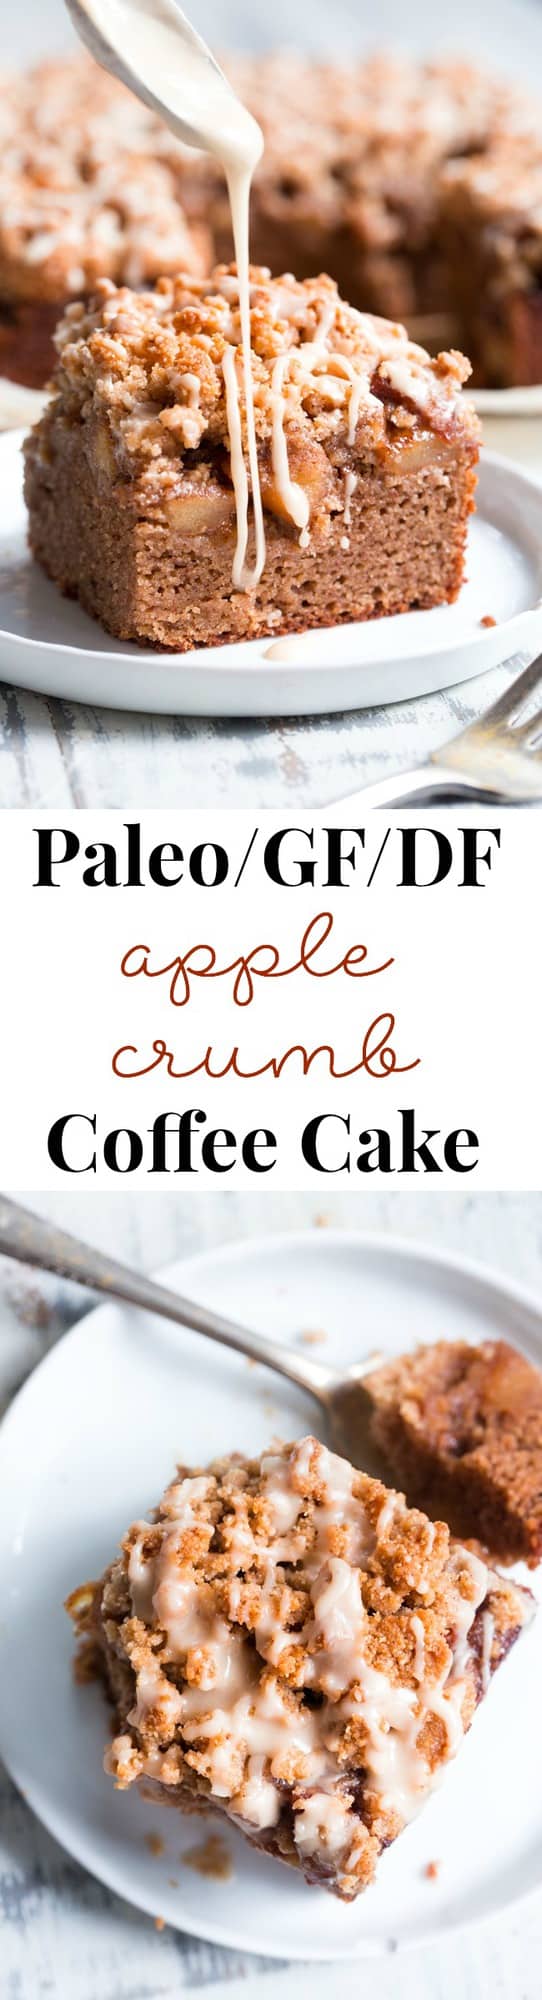 This paleo cinnamon apple coffee cake has it all!  Perfectly moist grain free dairy free coffee cake topped with a layer of homemade apple pie filling and a crumble top.  It's one of my favorites for fall baking and I know you and your family will love it as well!